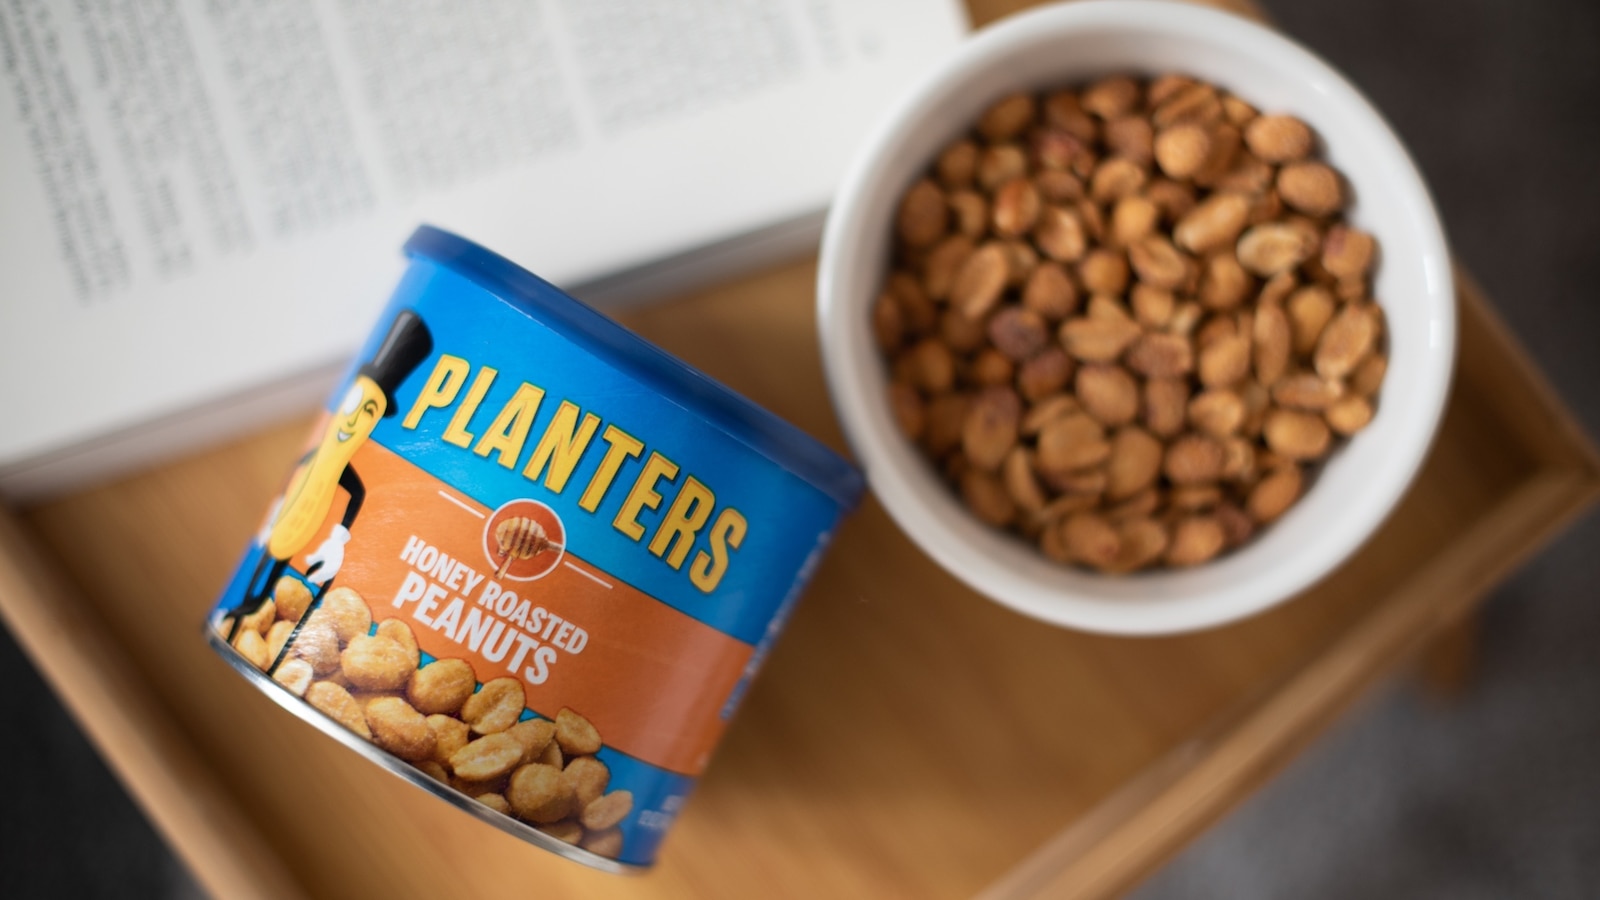 Some Planters nuts recalled for potential listeria contamination